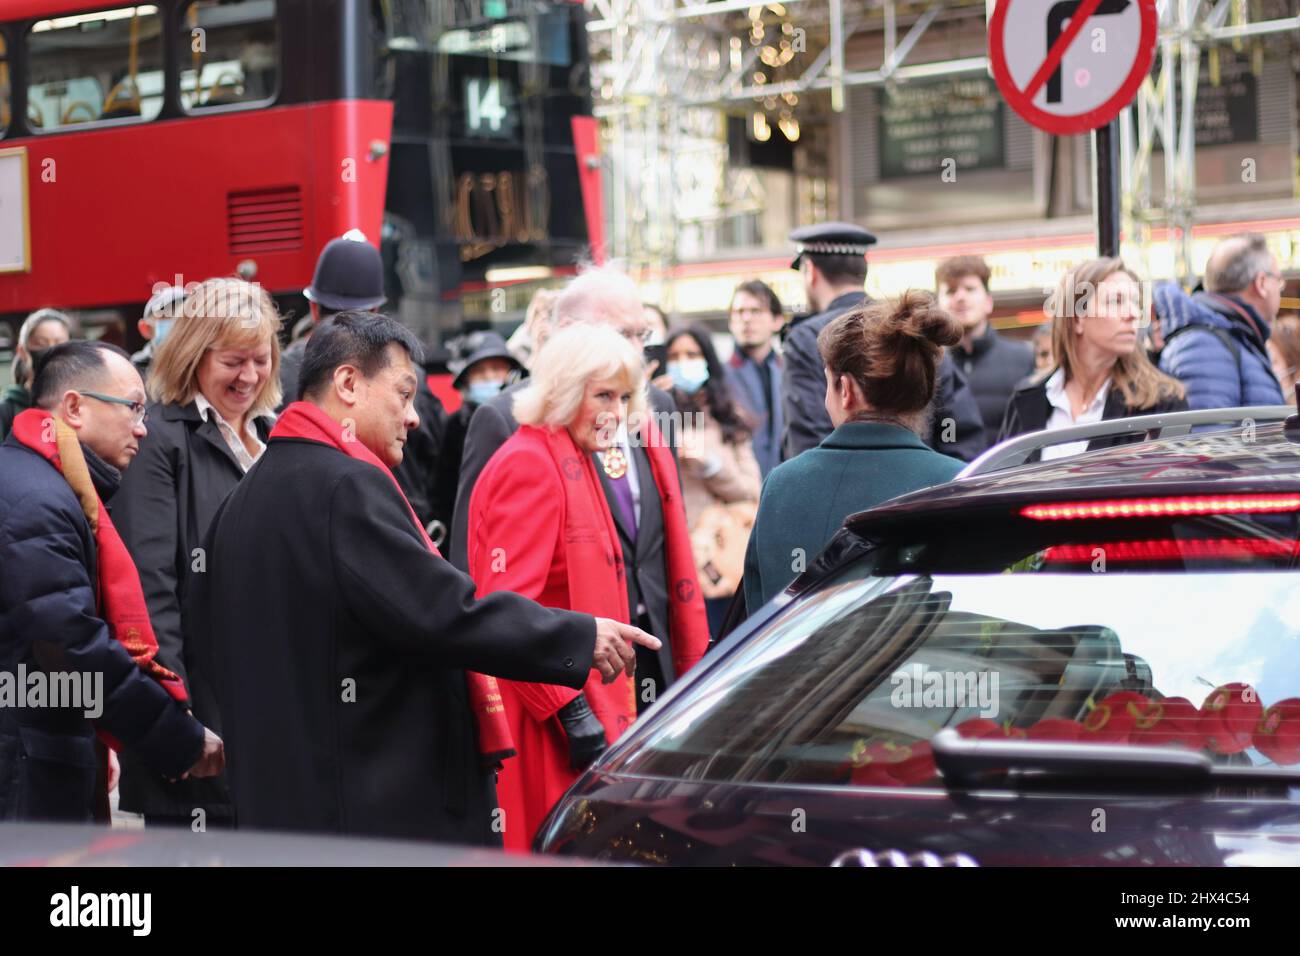 The Prince of Wales and the Duchess of Cornwall visit London's Chinatown to mark the start of the Lunar New Year 01/02/22 Stock Photo